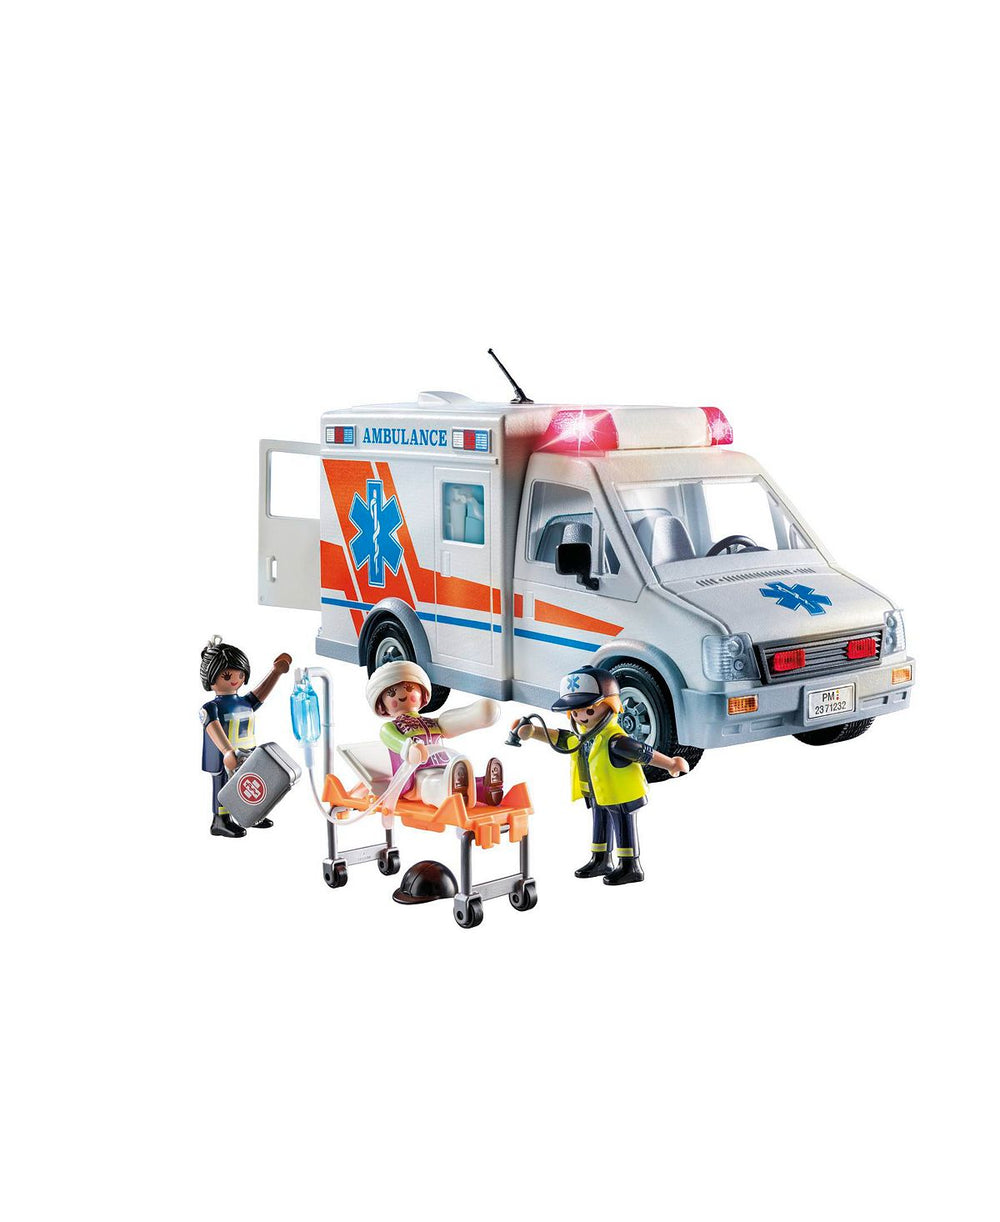 Playmobil City Action Ambulance Playset with Light and Sound Effects